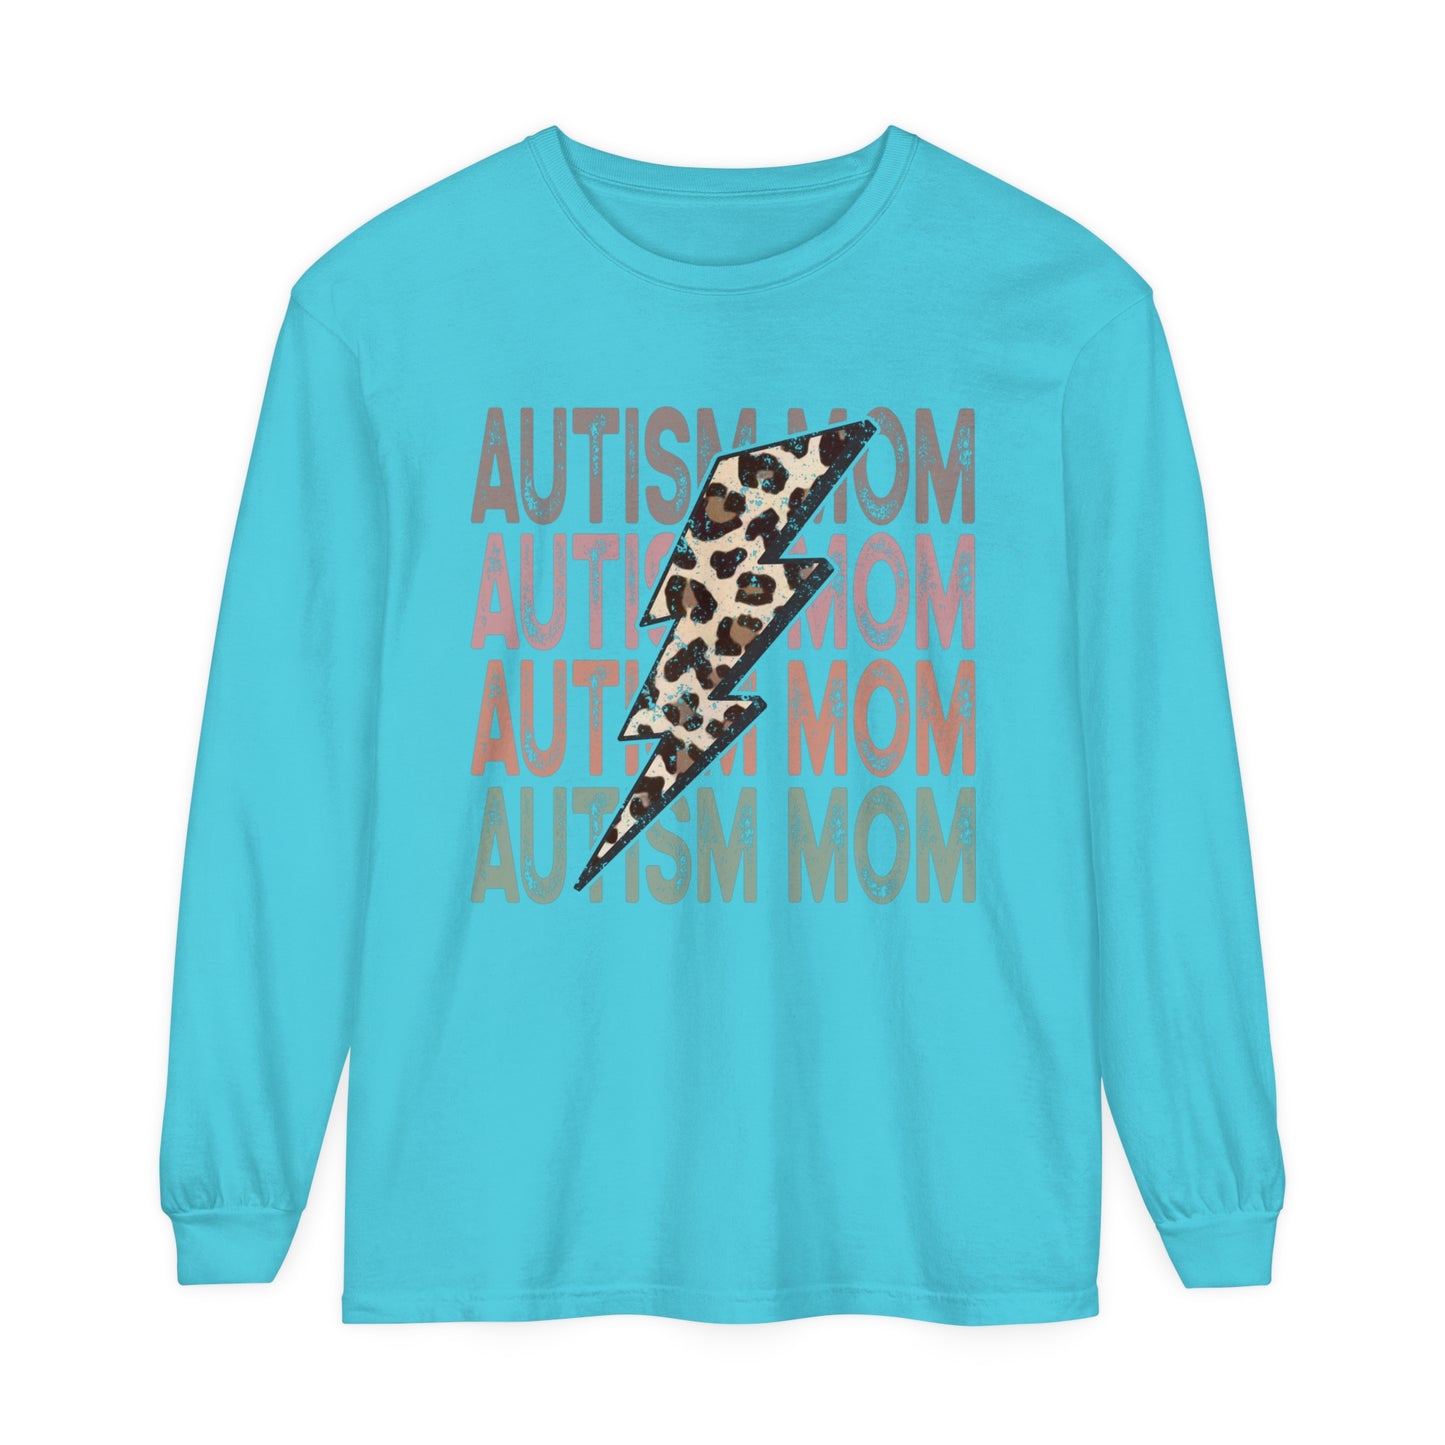 Autism Mom Advocate Loose Long Sleeve T-Shirt